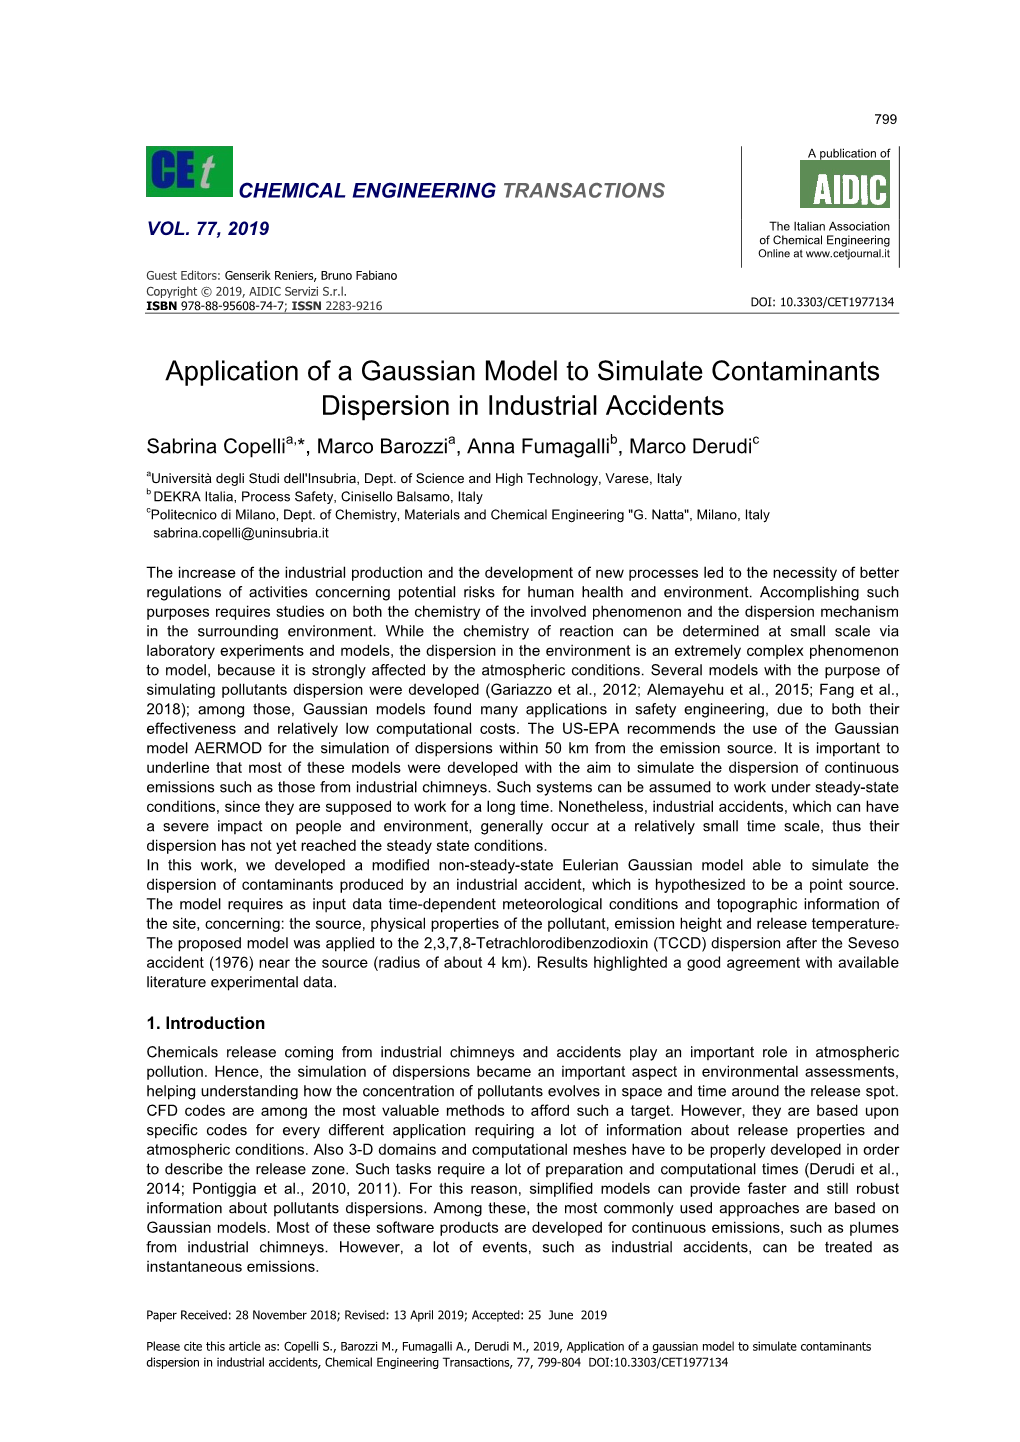 Application of a Gaussian Model to Simulate Contaminants Dispersion in Industrial Accidents, Chemical Engineering Transactions, 77, 799-804 DOI:10.3303/CET1977134 800